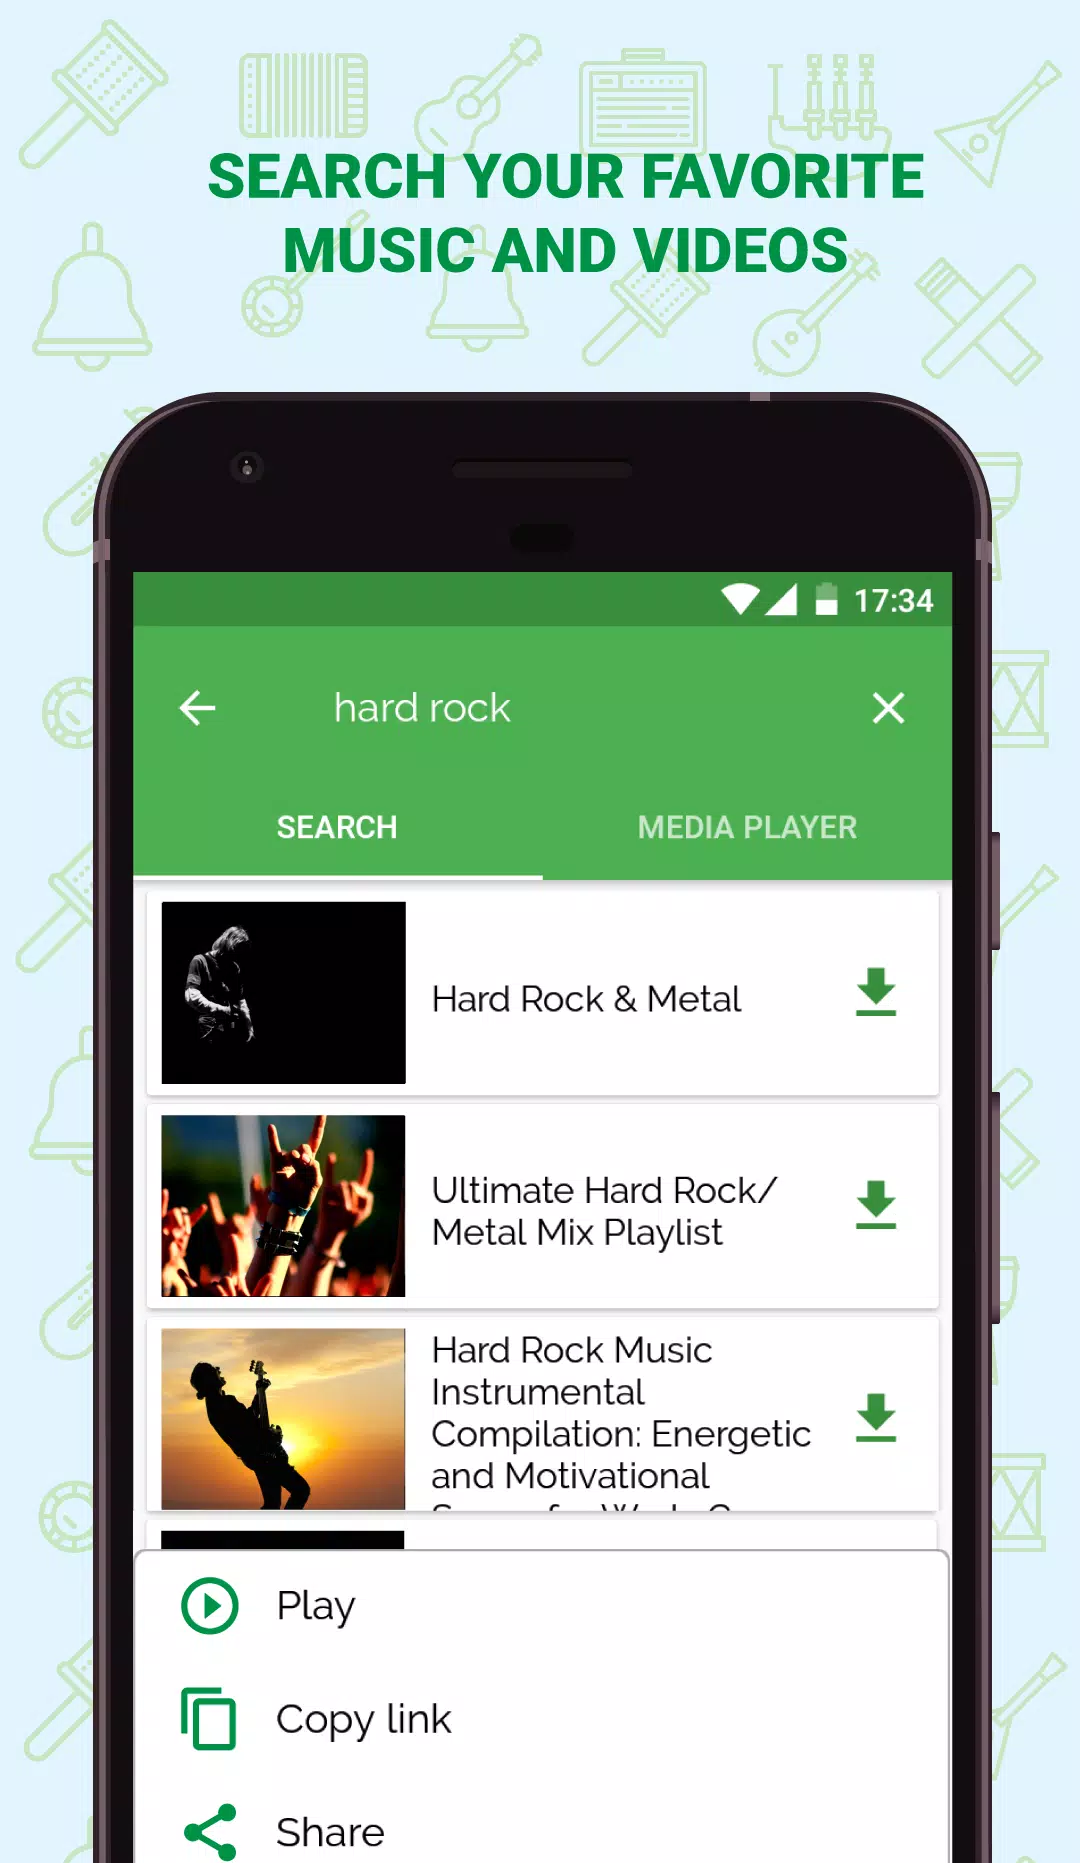 VideoMp3 - find free music mp3 APK for Android Download